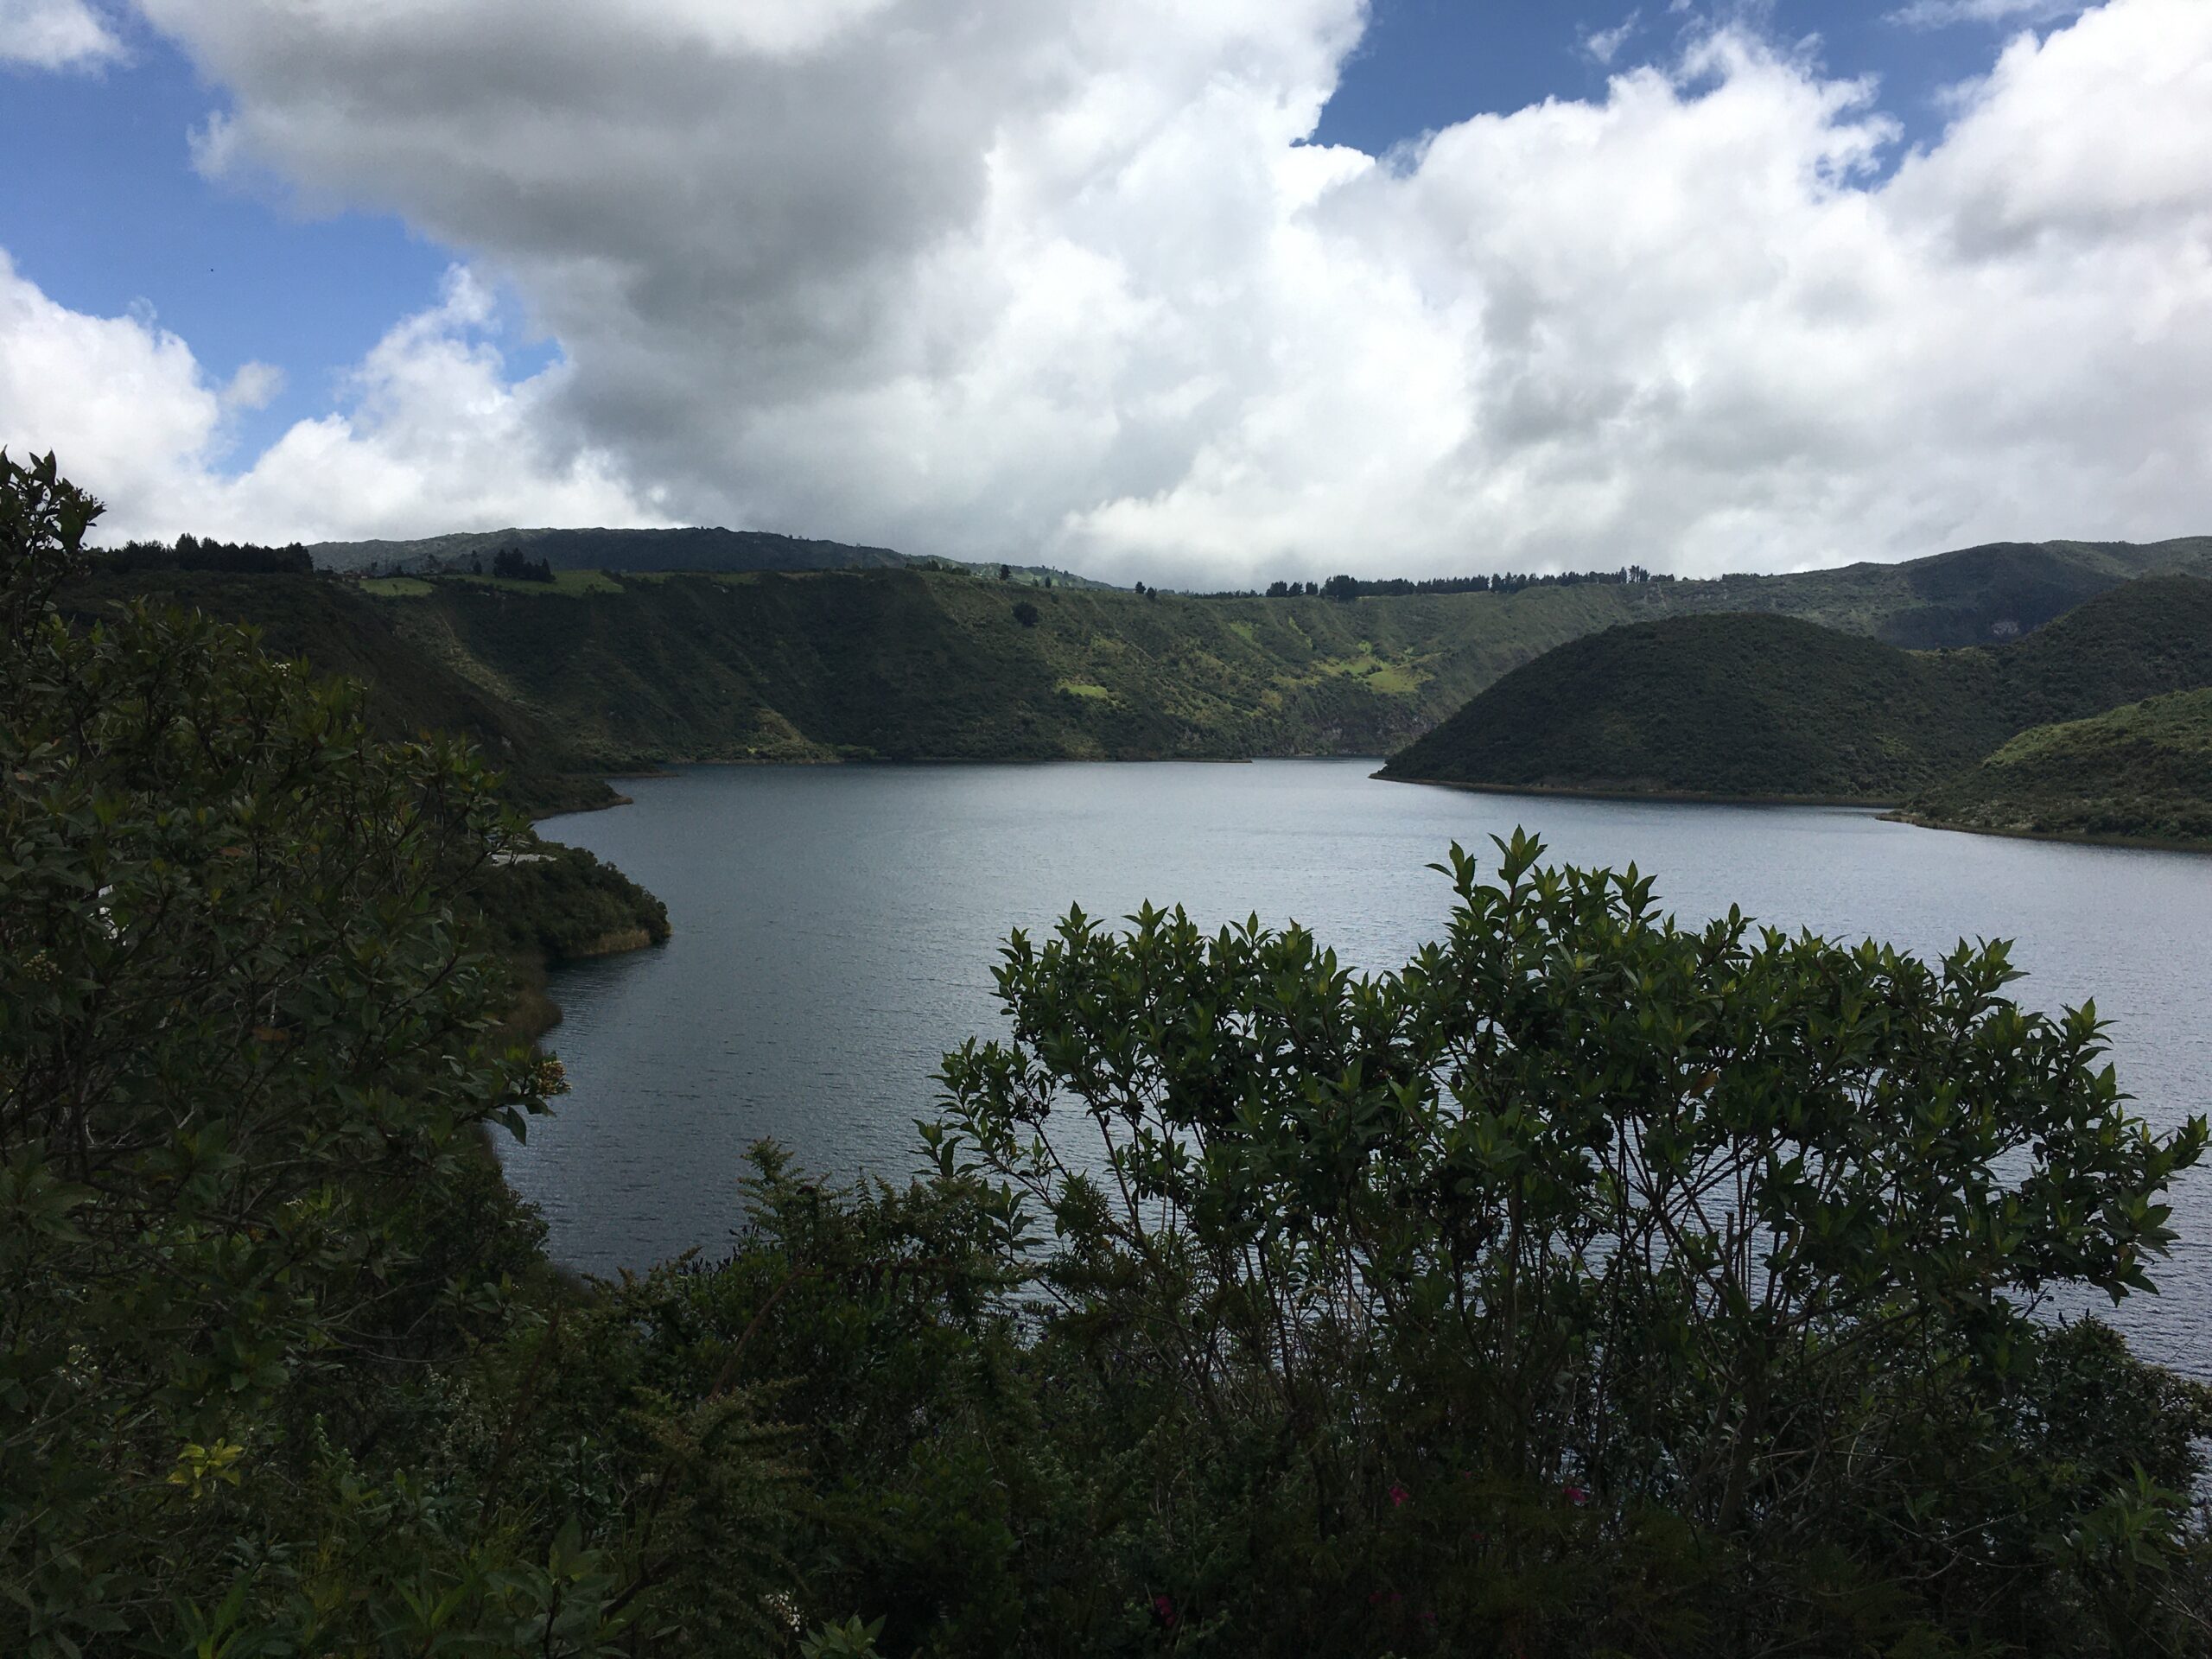 Pictured is the Cuicocha lake. The greyish-blue lake centers the photo, with green mountains surrounding the lake. 